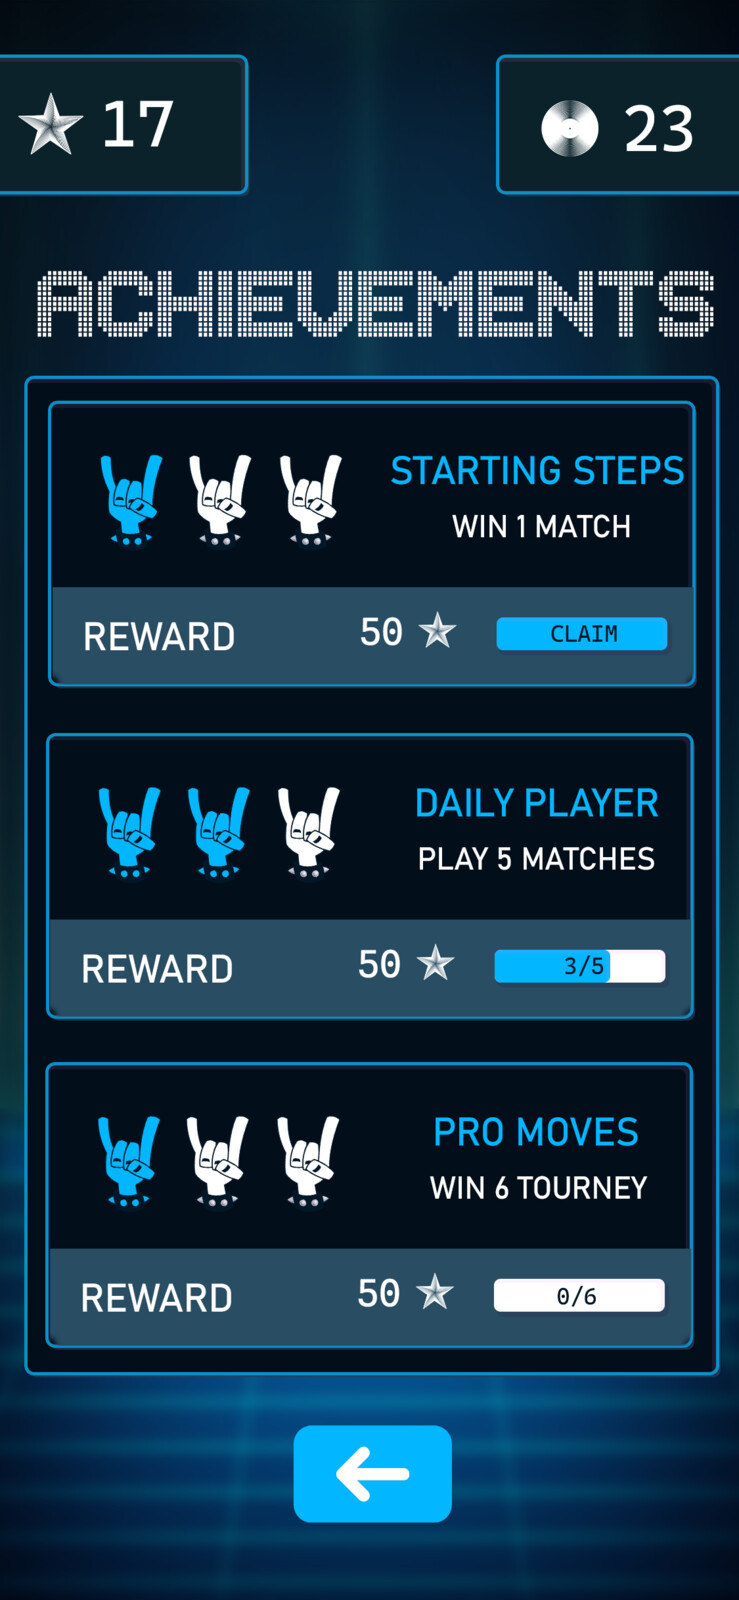 Achievements screen featuring rocking hands instead of stars/trophies as seen in general games